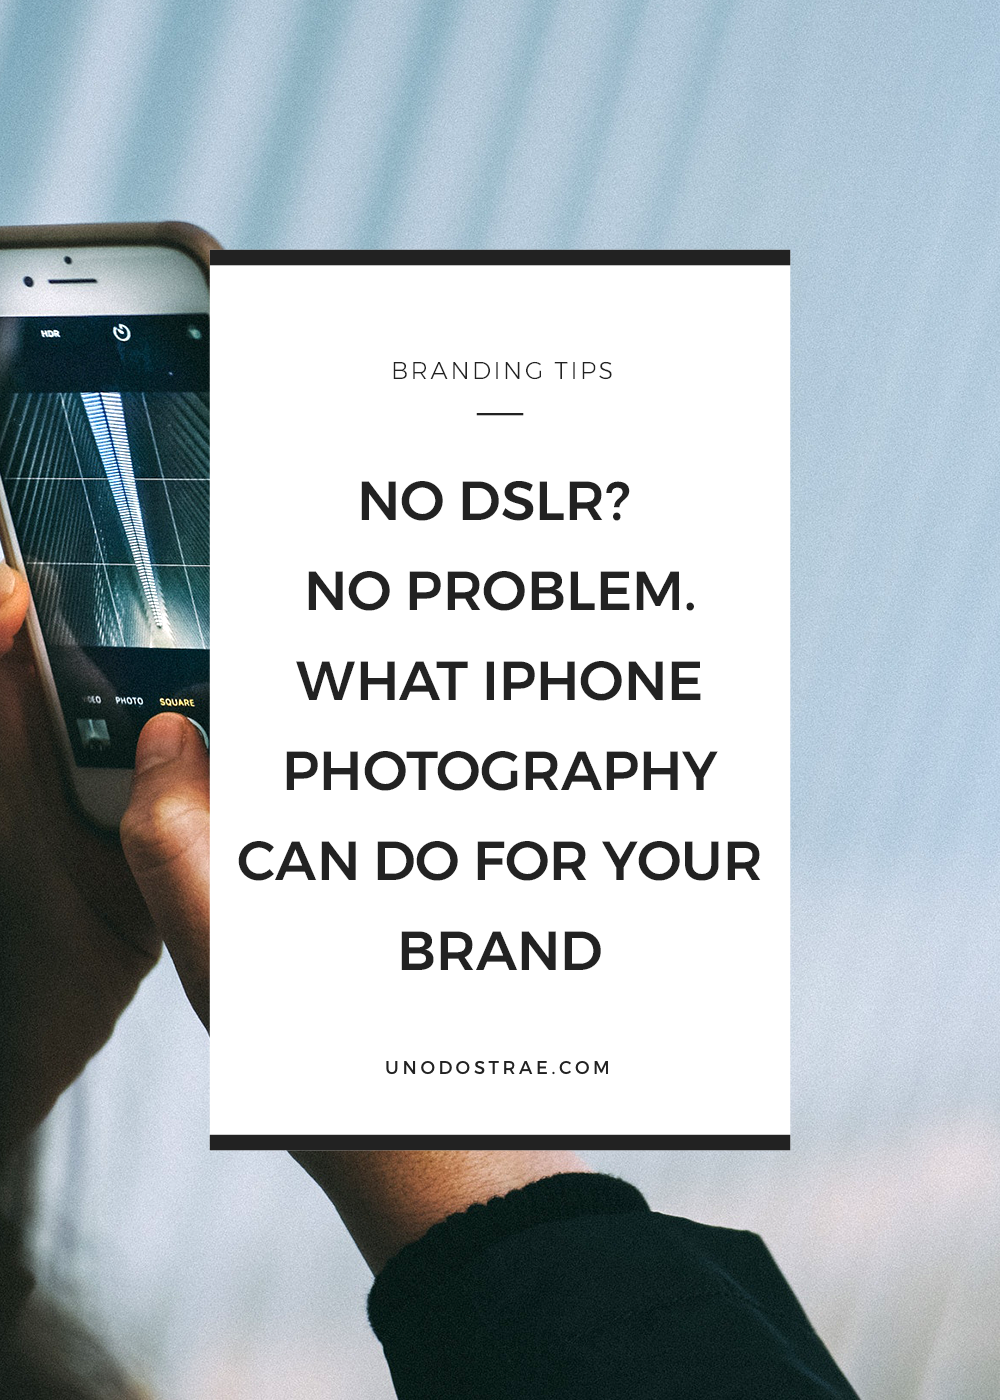 Don't feel like if you don't have a professional camera that you can't take stunning photos for your brand. Use these iPhone photography tips to amp up your branded photos!